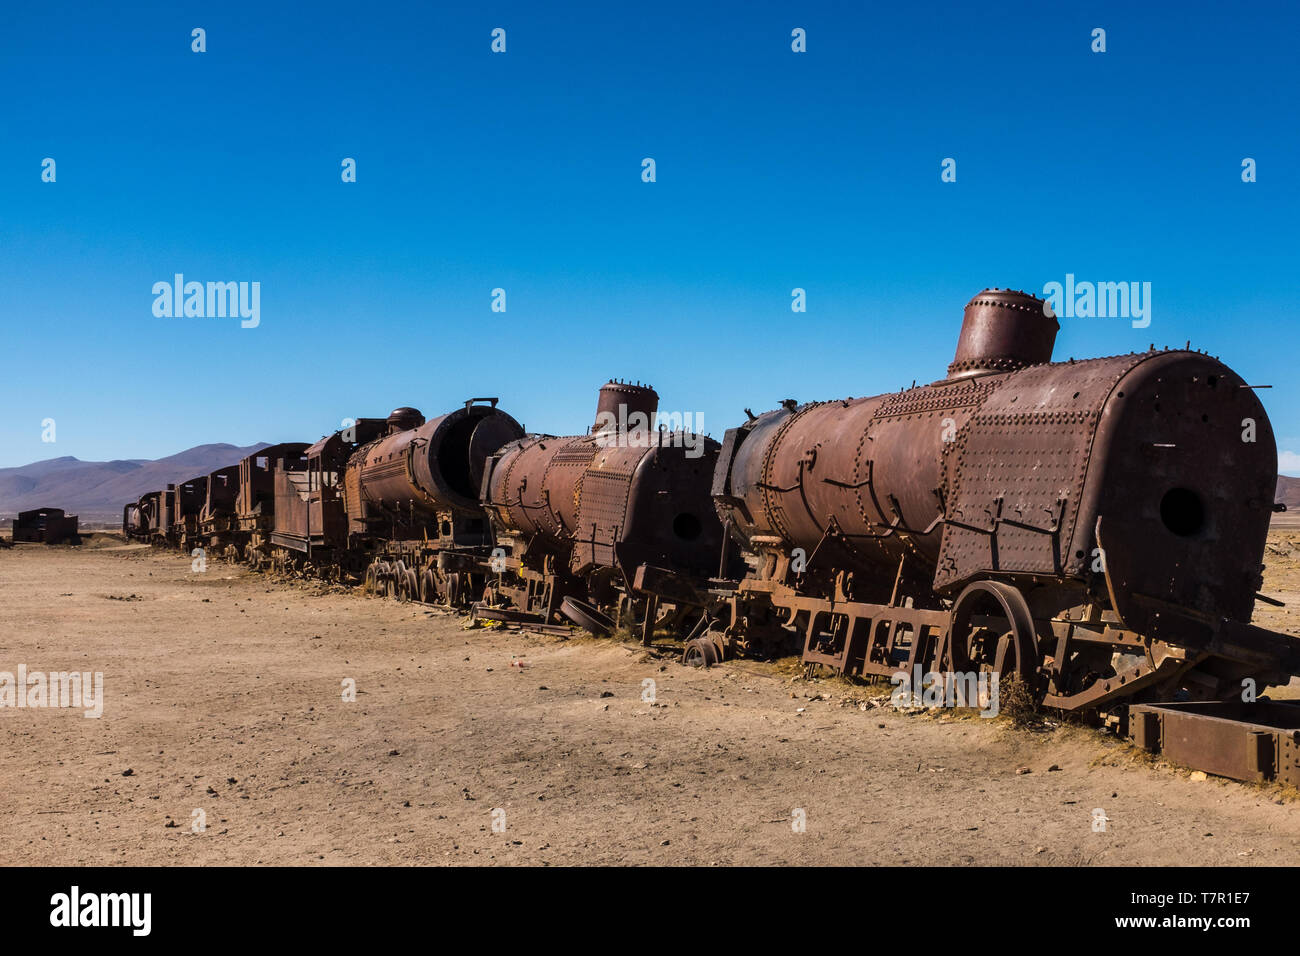 Rusting steam trains and carriages slowly rot away at the train graveyard just outside of Uyuni, Bolivia, against a bright blue sky. Stock Photo